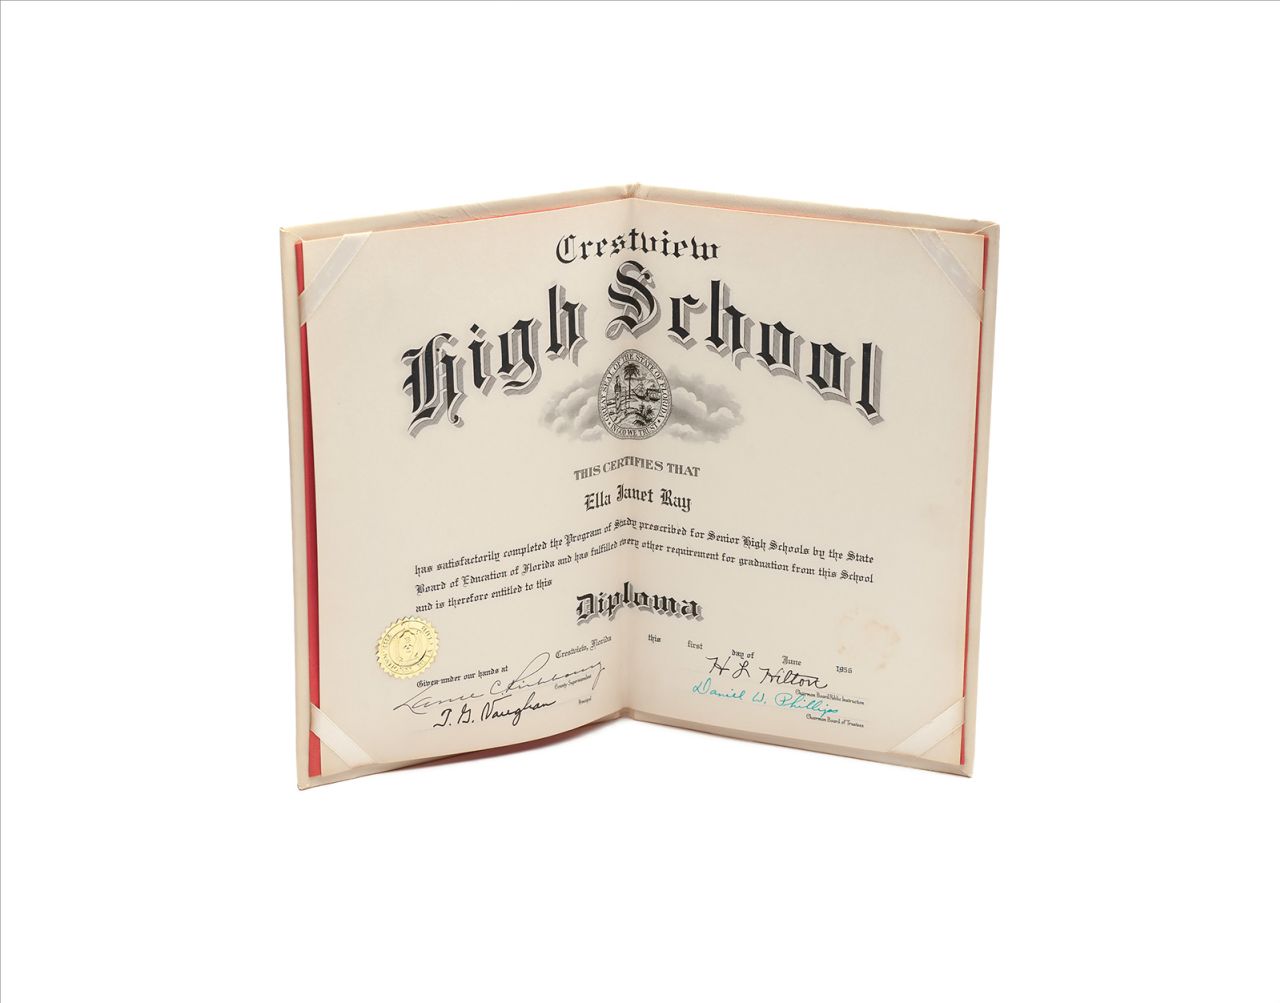 A woman's high-school diploma, kept by her daughter after her death, is among dozens of objects featured in the book.